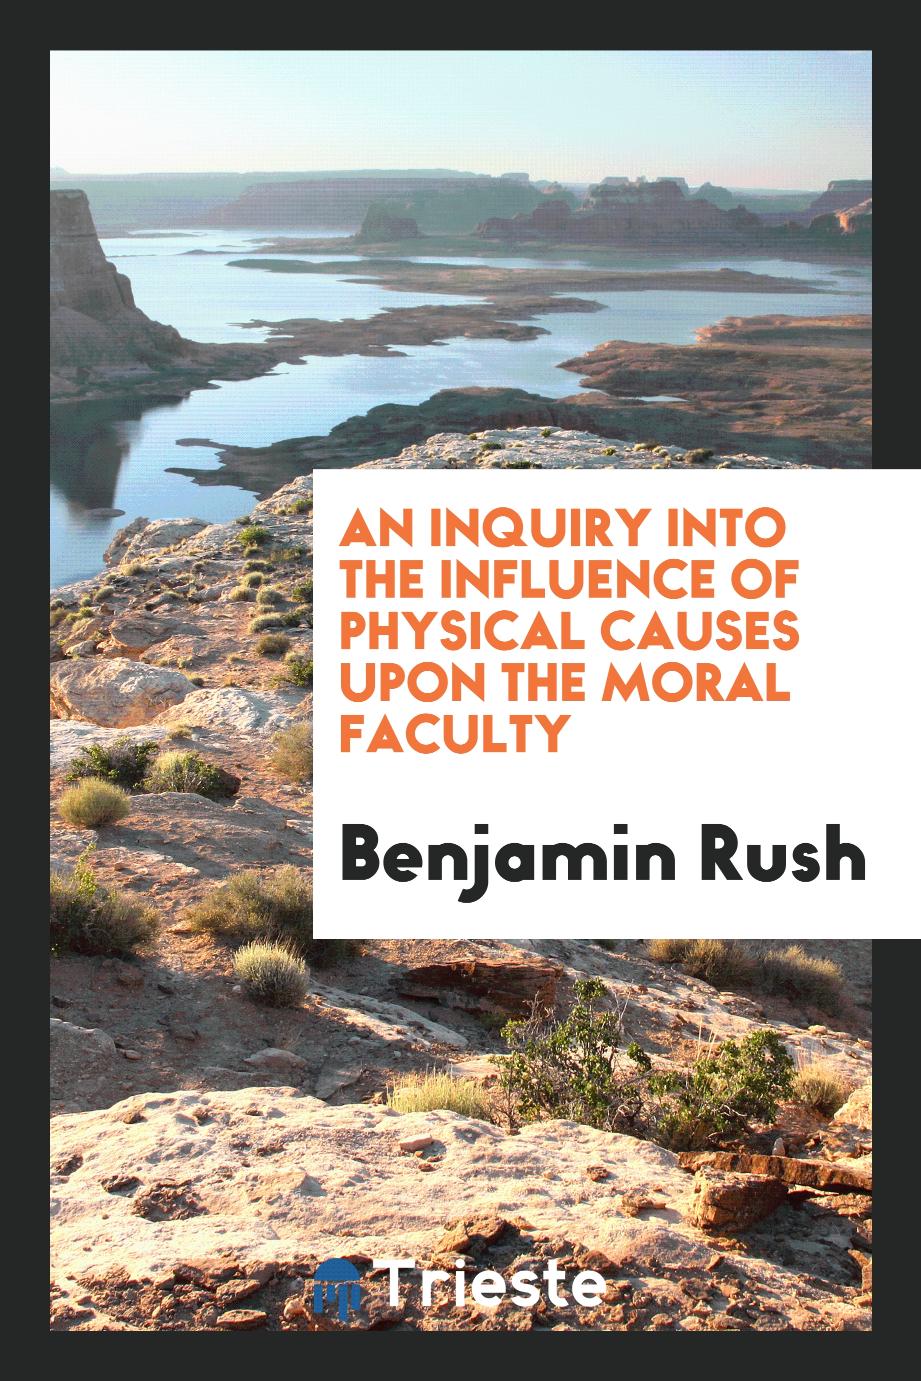 An Inquiry Into the Influence of Physical Causes Upon the Moral Faculty